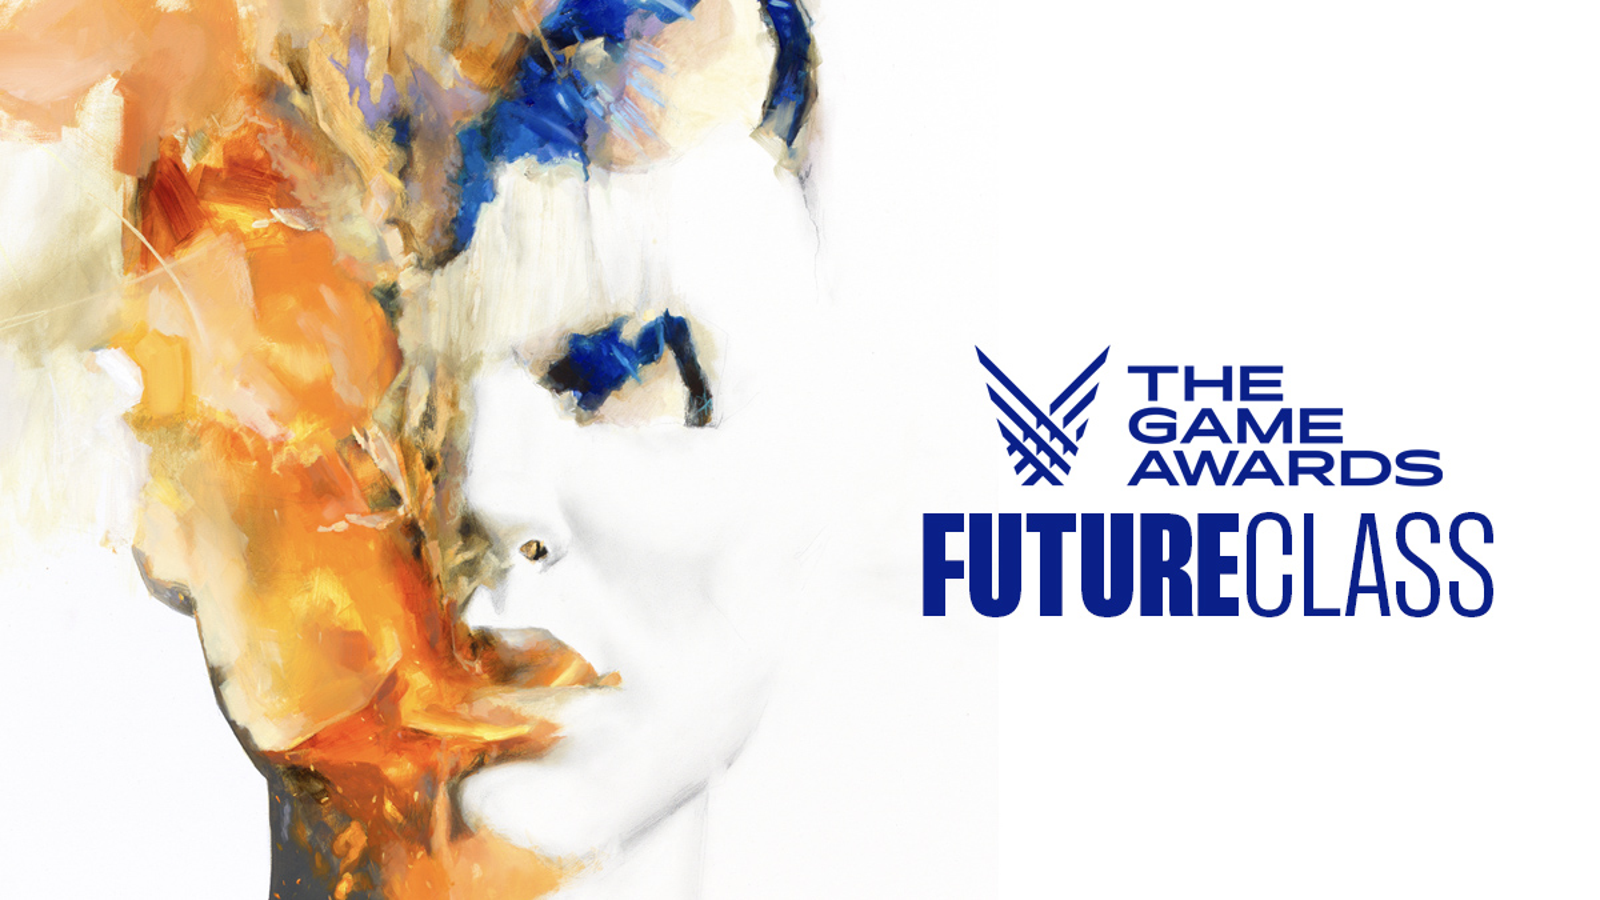 The Game Awards reveals 2022 Future Class - Inven Global